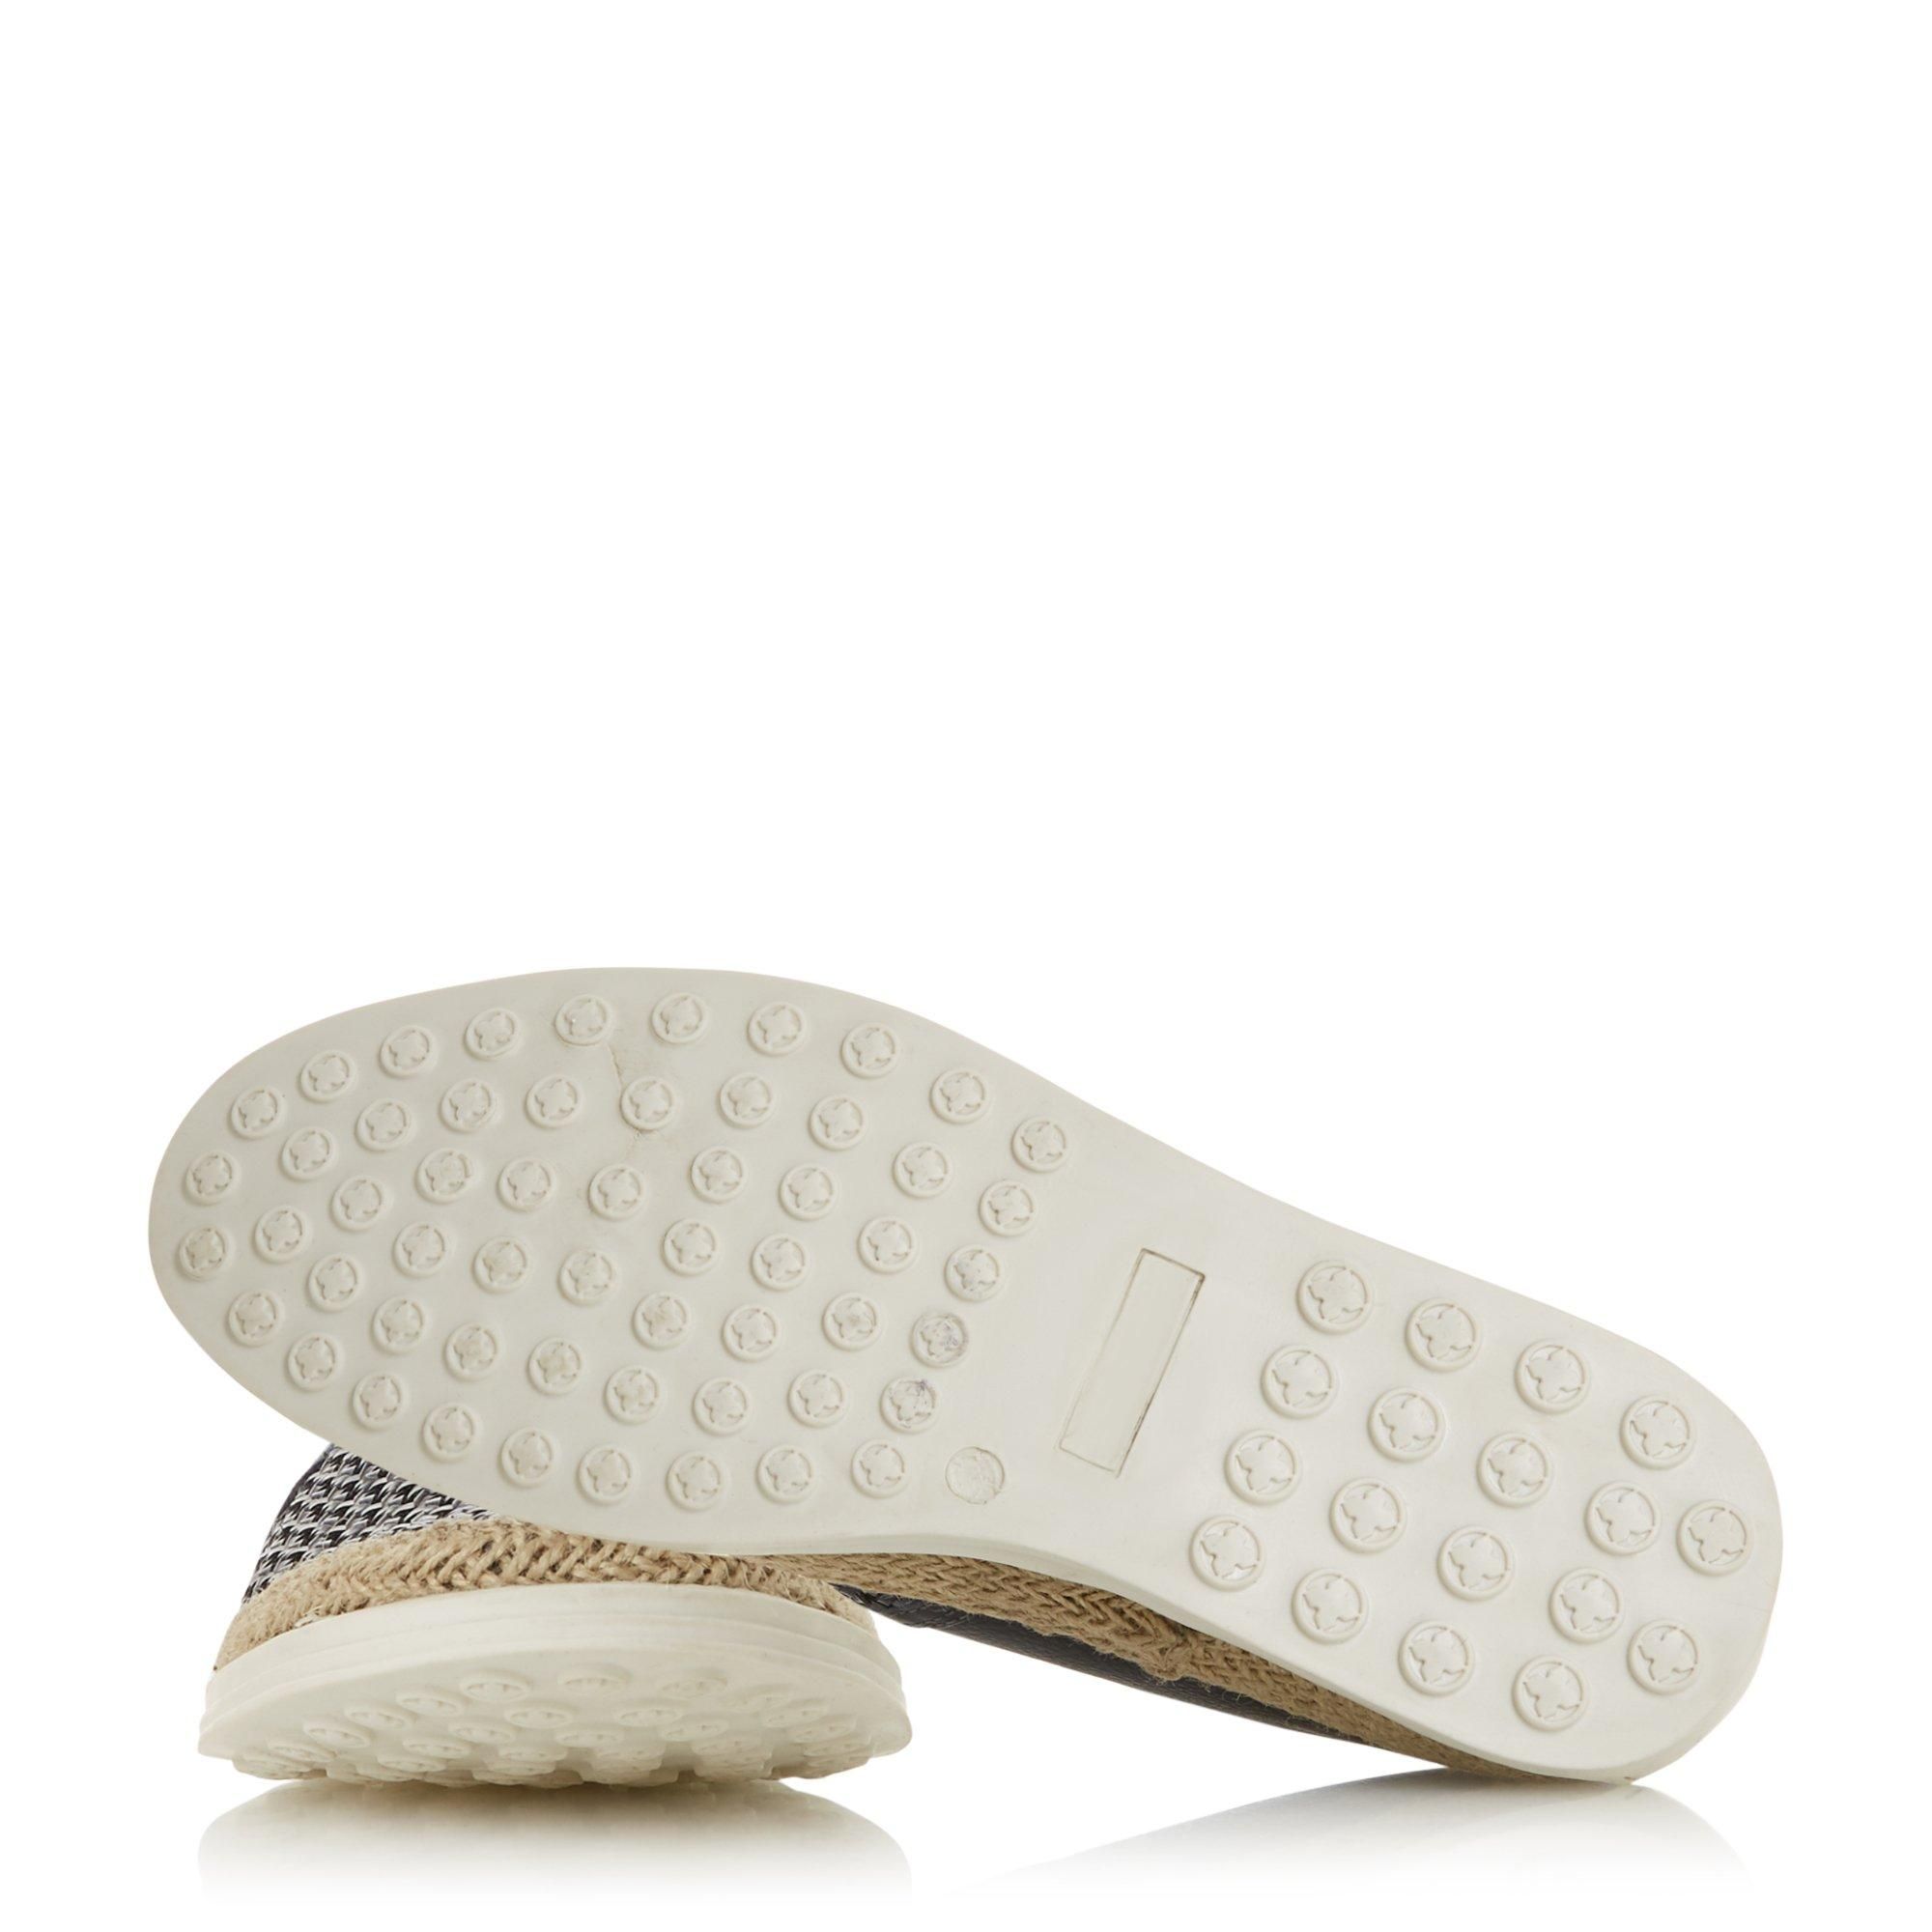 Refresh your summer edit with the Barolo shoe from Dune London. Showcasing a classic slip-on design with an espadrille trimmed sole. It features a stylish woven finish with elasticated inserts for comfort.